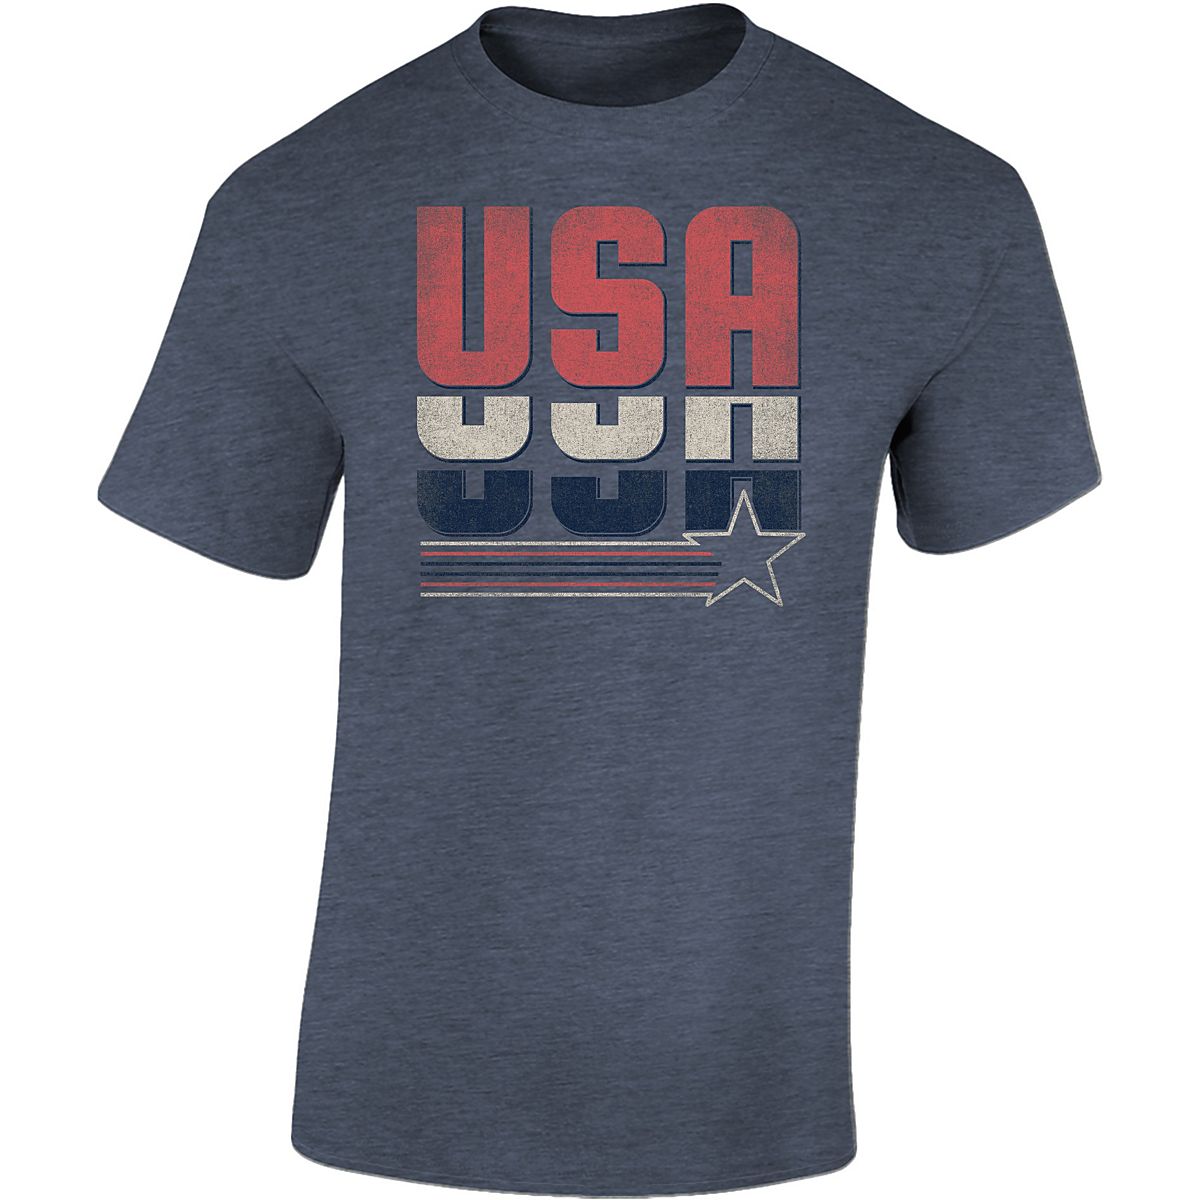 Academy Sports + Outdoors Men's USA Repeat Graphic T-shirt | Academy